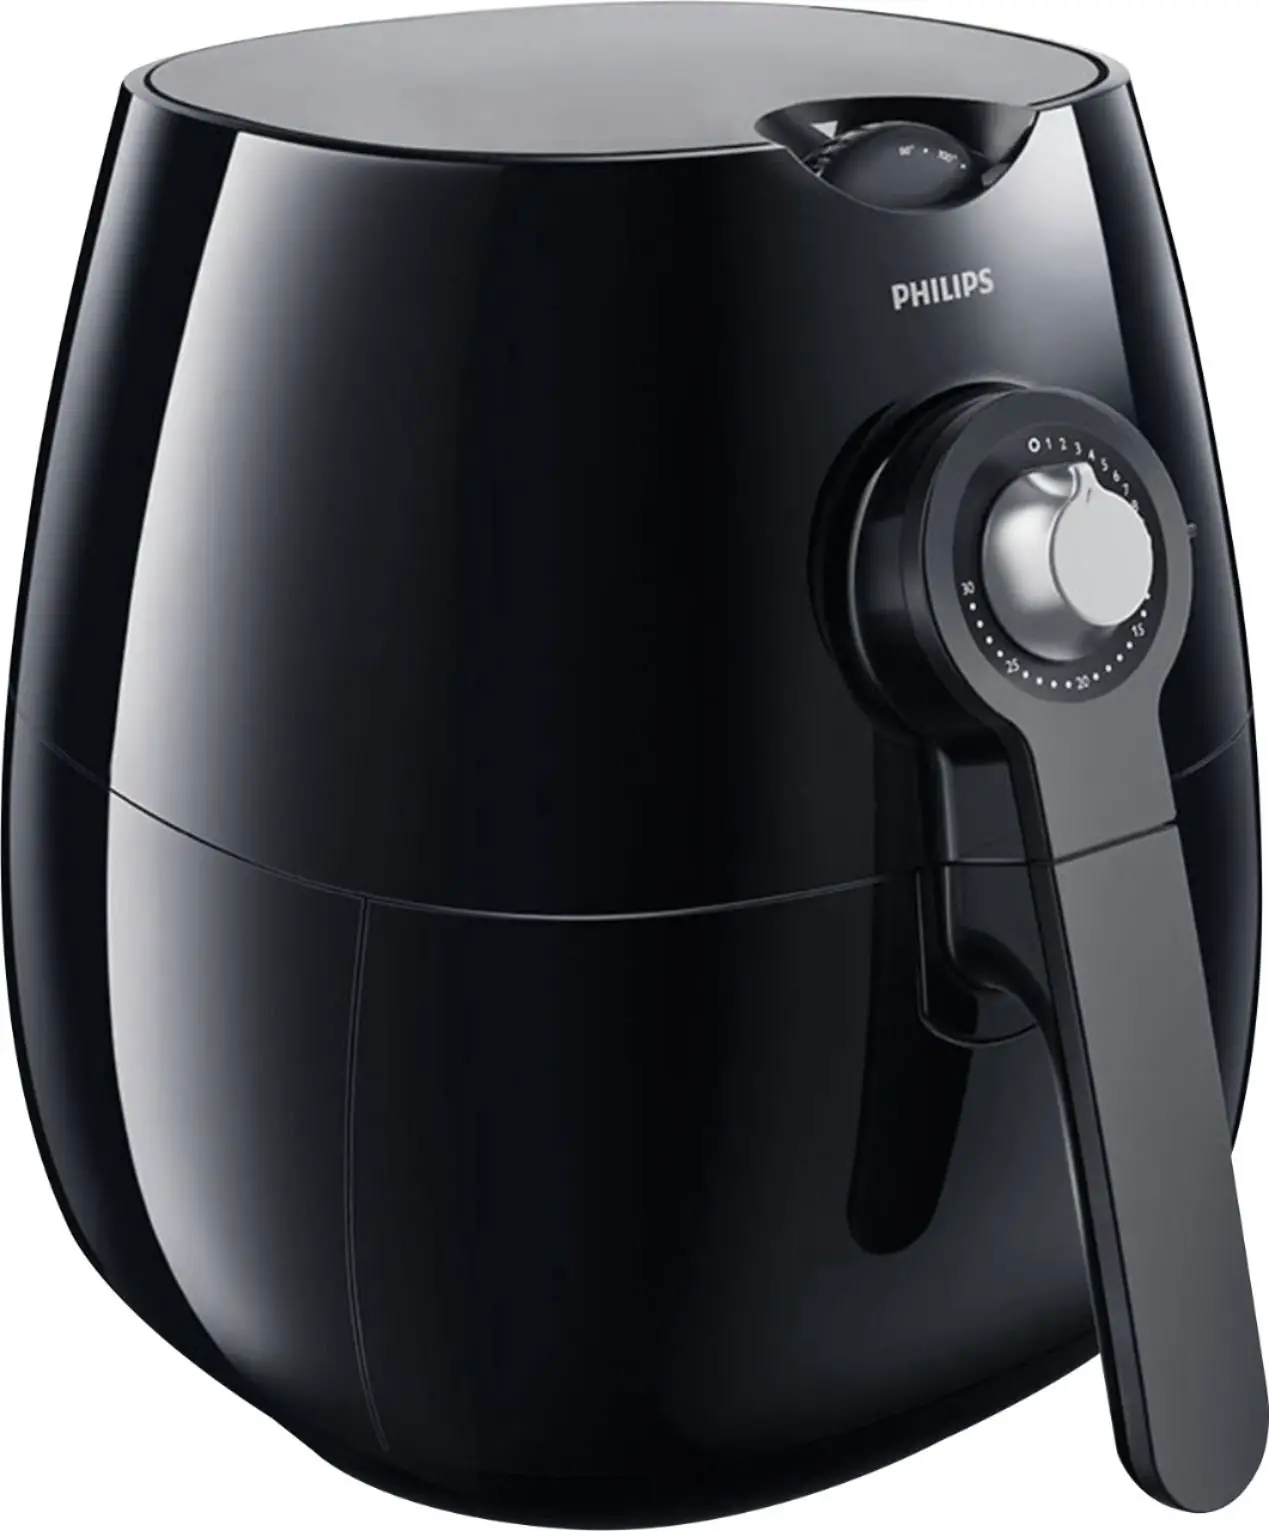 Philips Viva Collection Analog Air Fryer Black HD9220/29